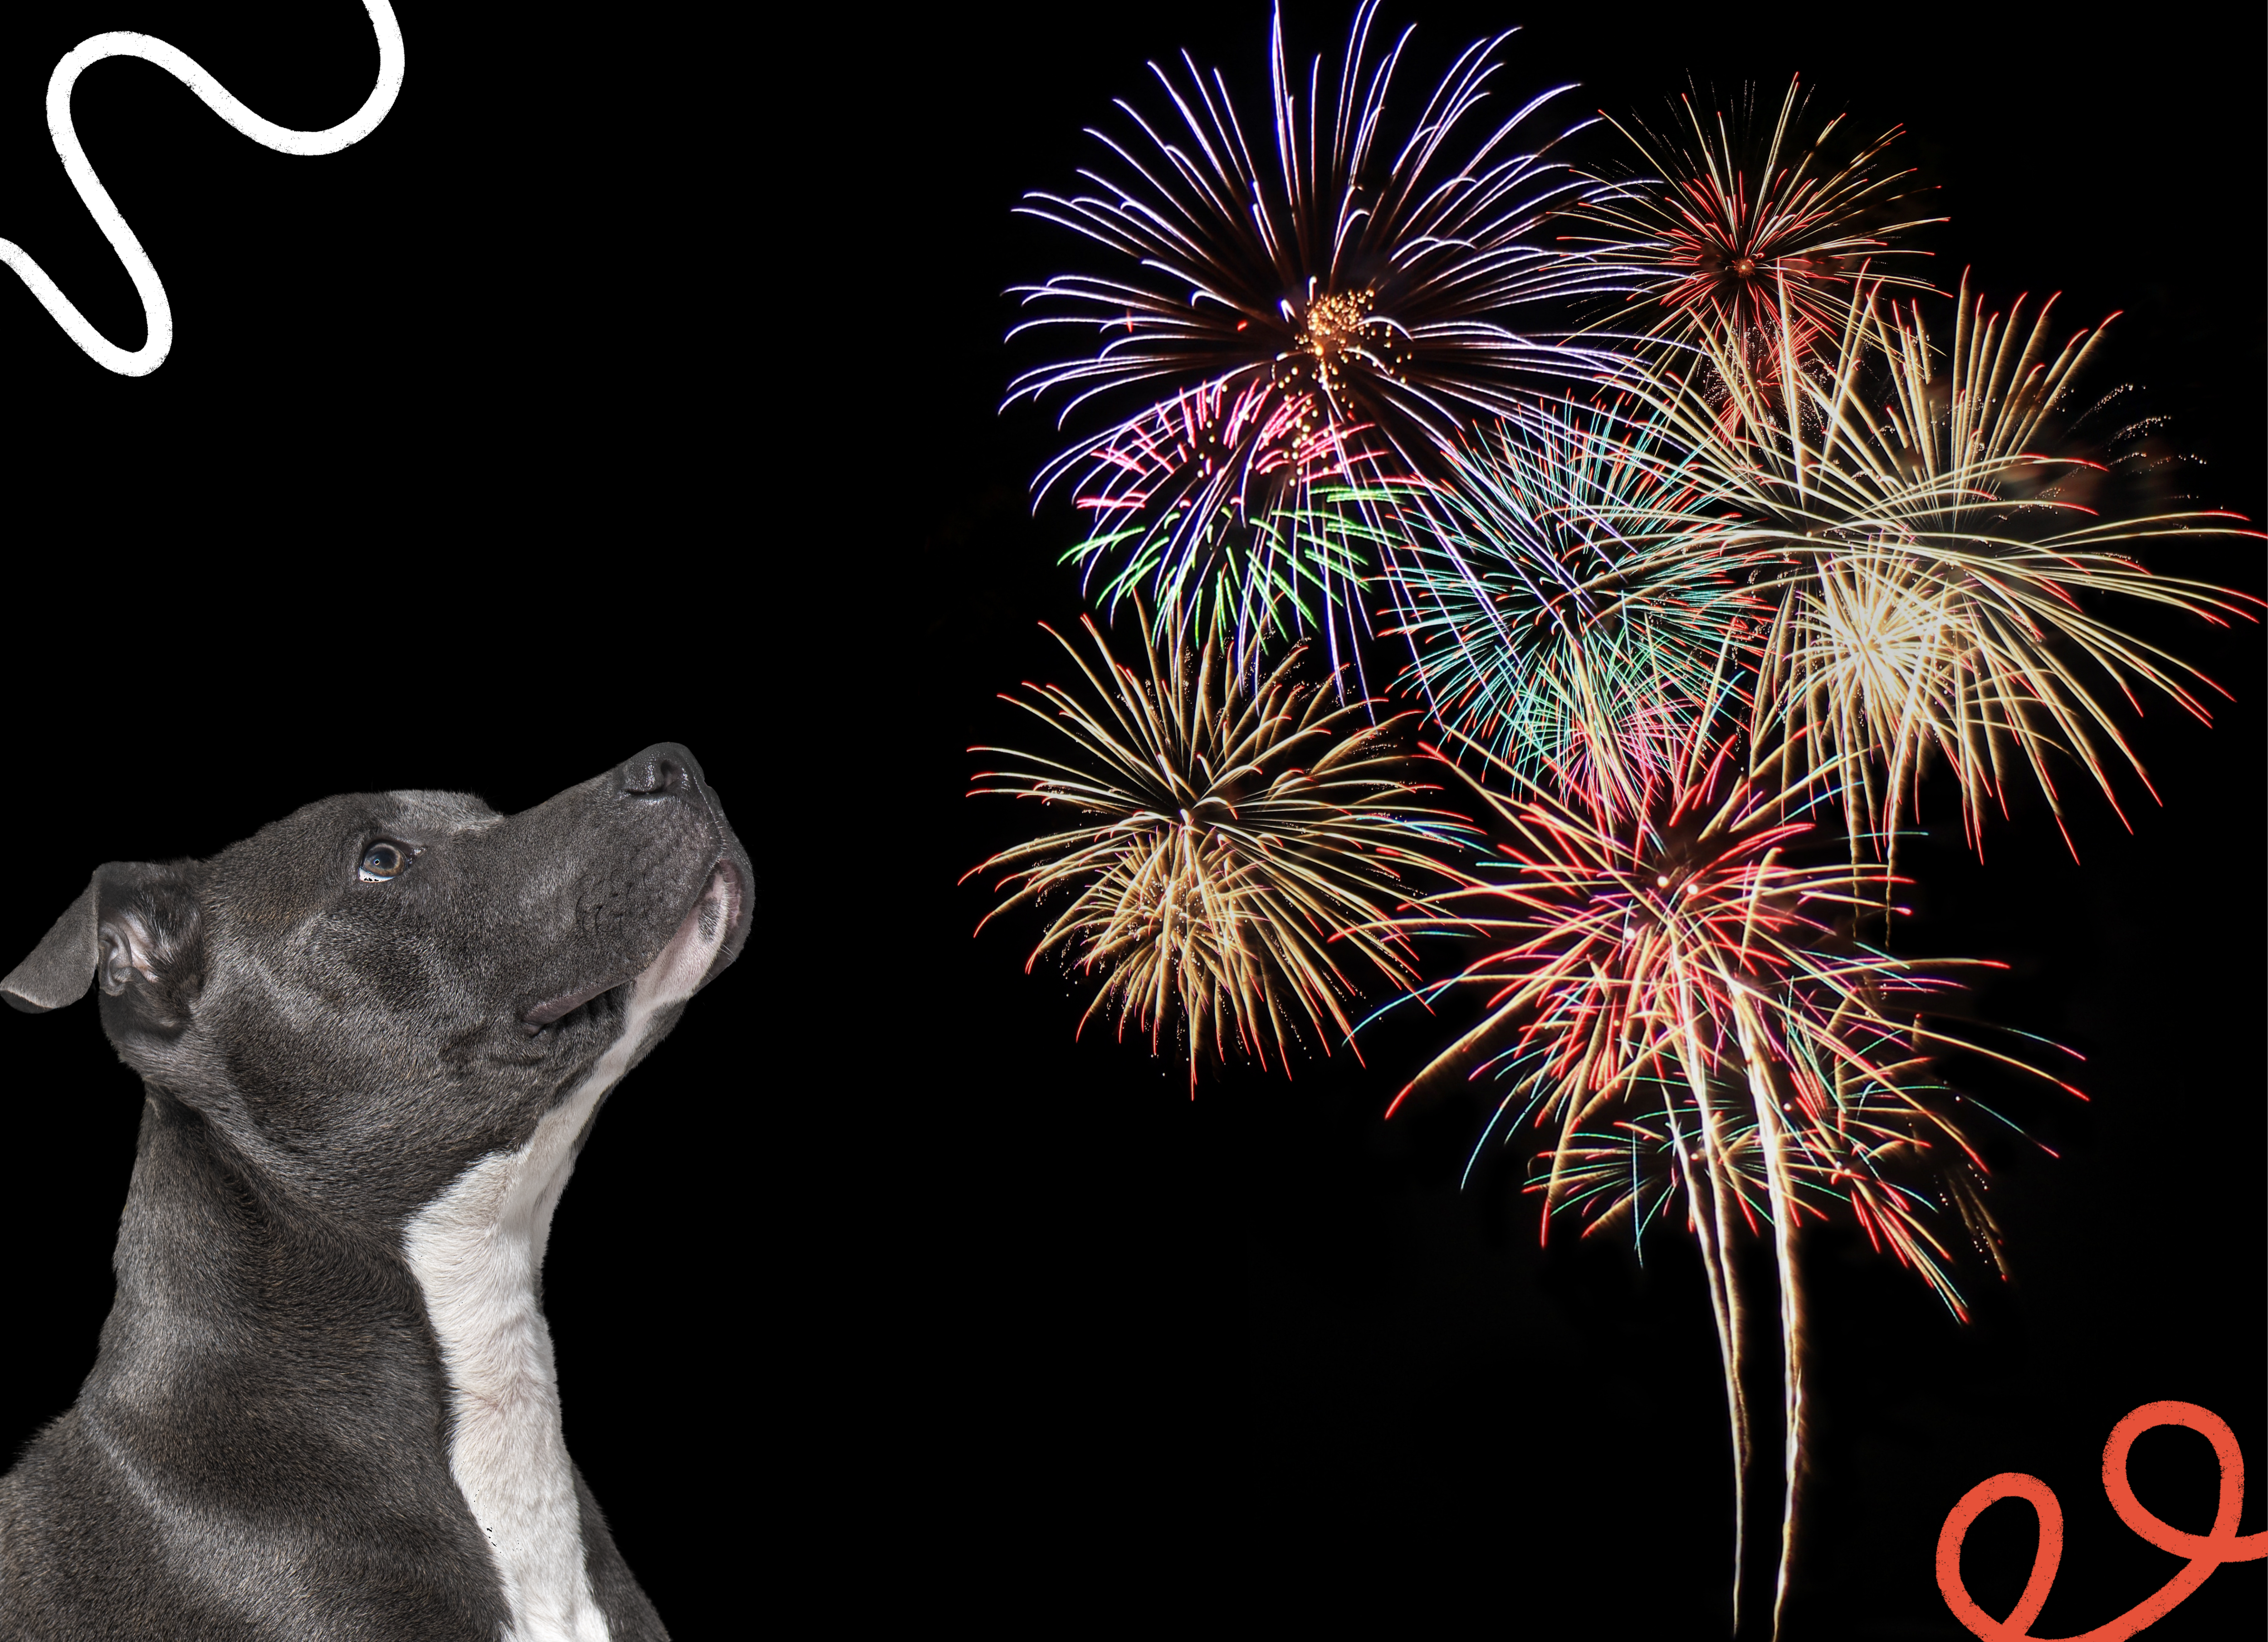 New Survey Finds Fireworks Cause Stress in Nearly 80% of Dogs